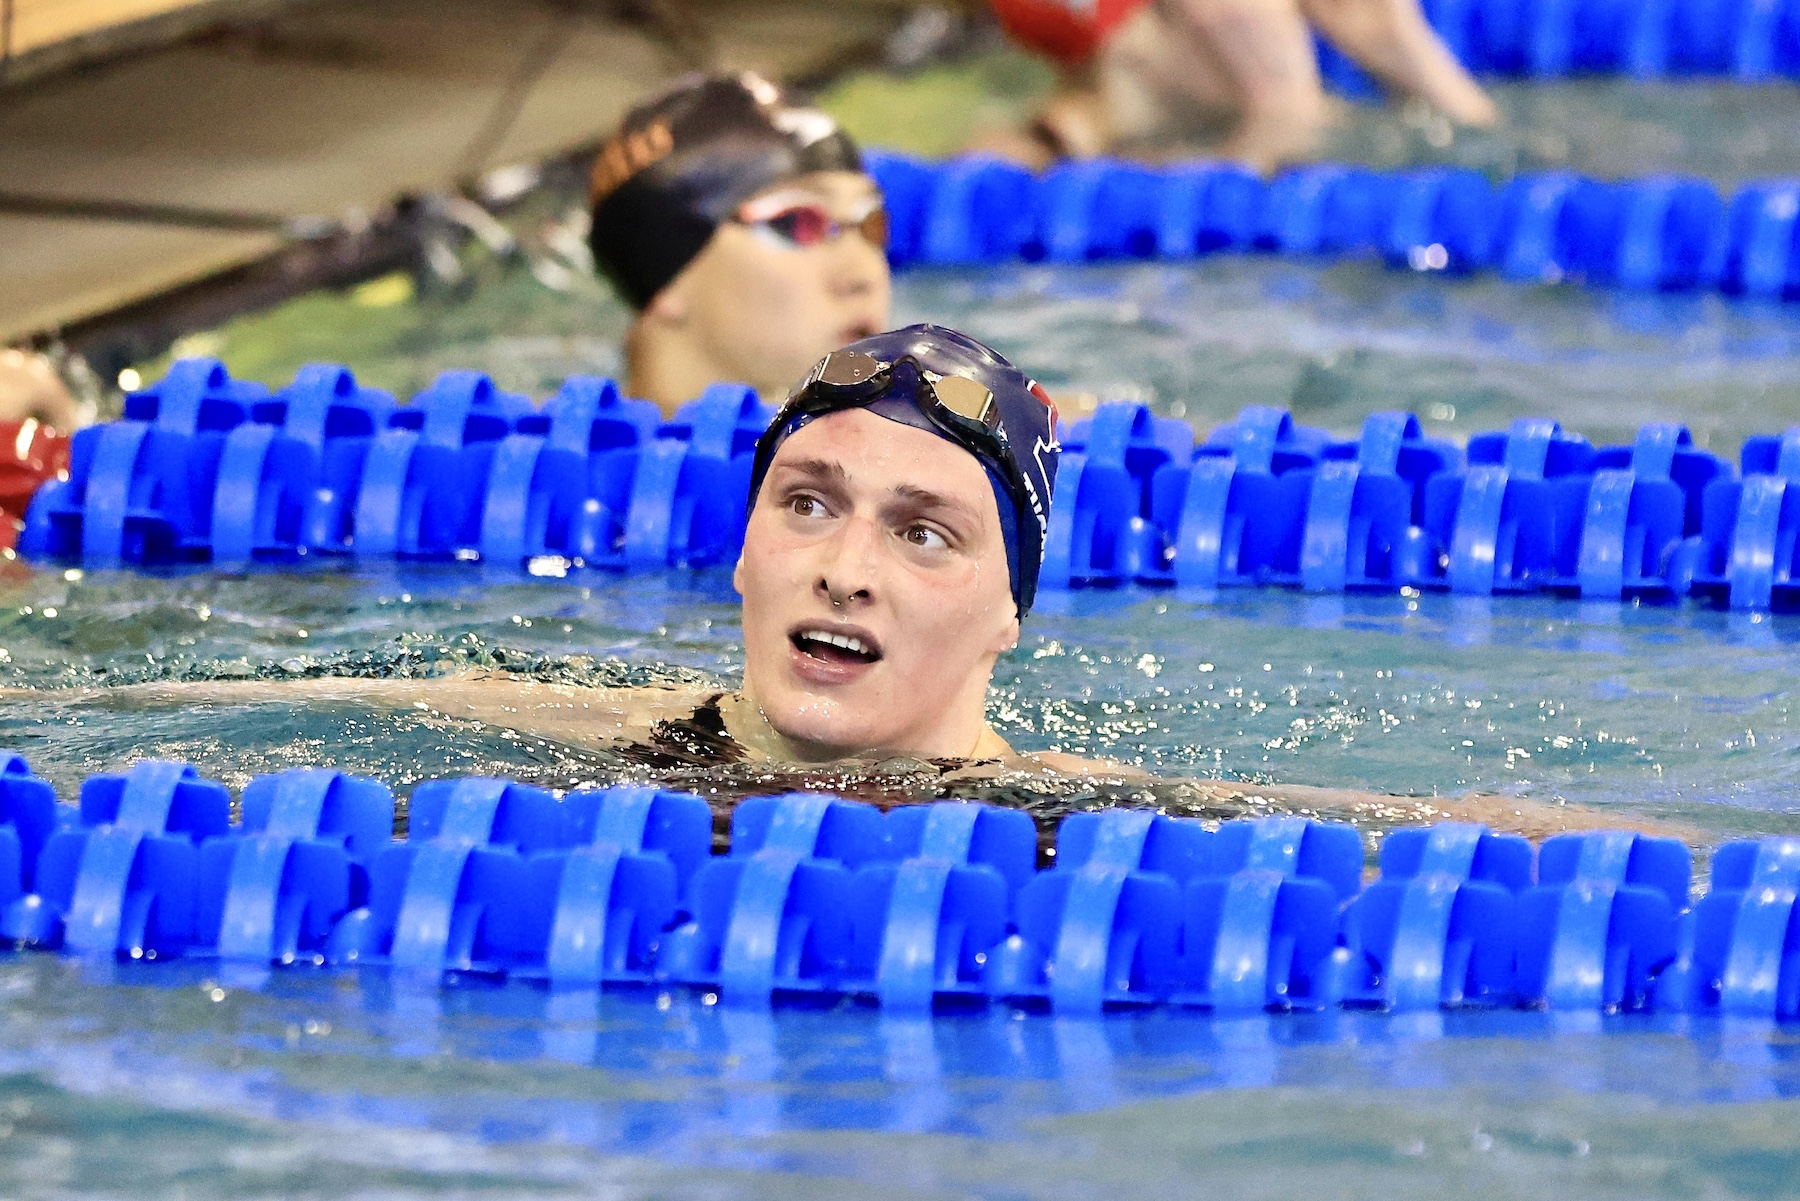 Trans swimmers Lia Thomas wins the 500-yard freestyle at the NCAA Women's Swimming Championship.